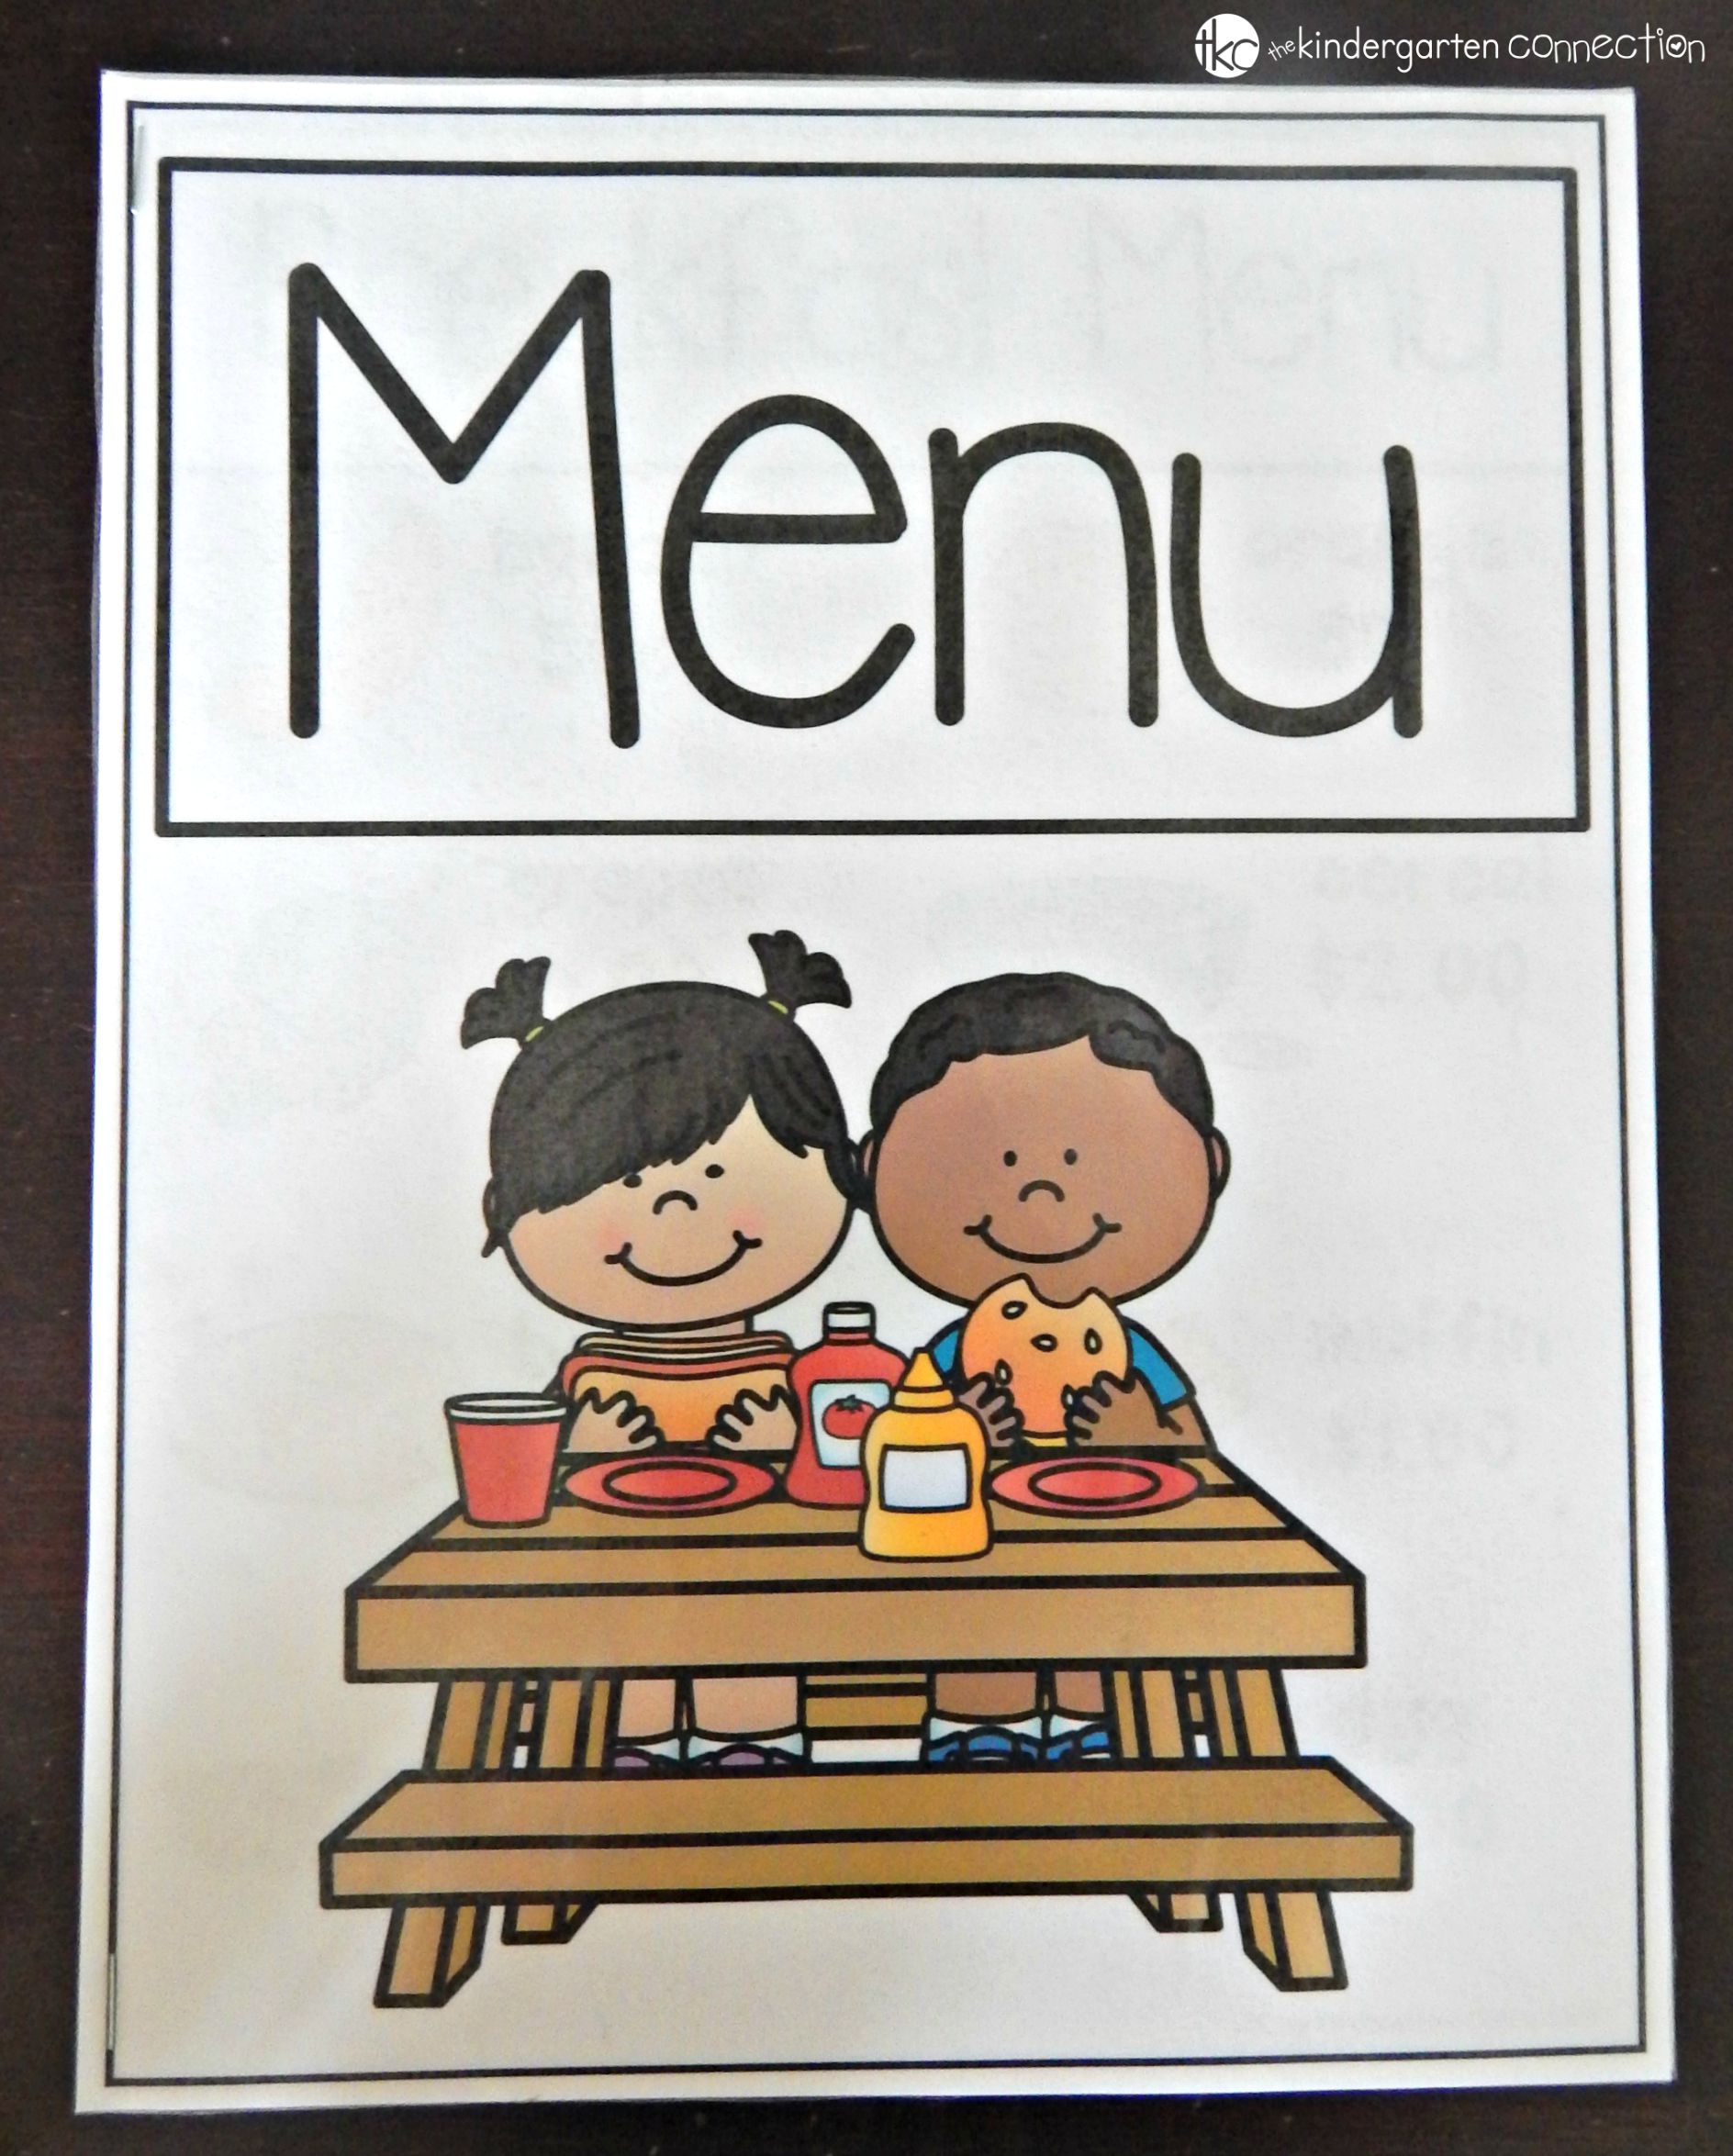 These free printables will help you set up and prep a fun dramatic play restaurant for kids! This is perfect for home or a Pre-K/Kindergarten classroom!